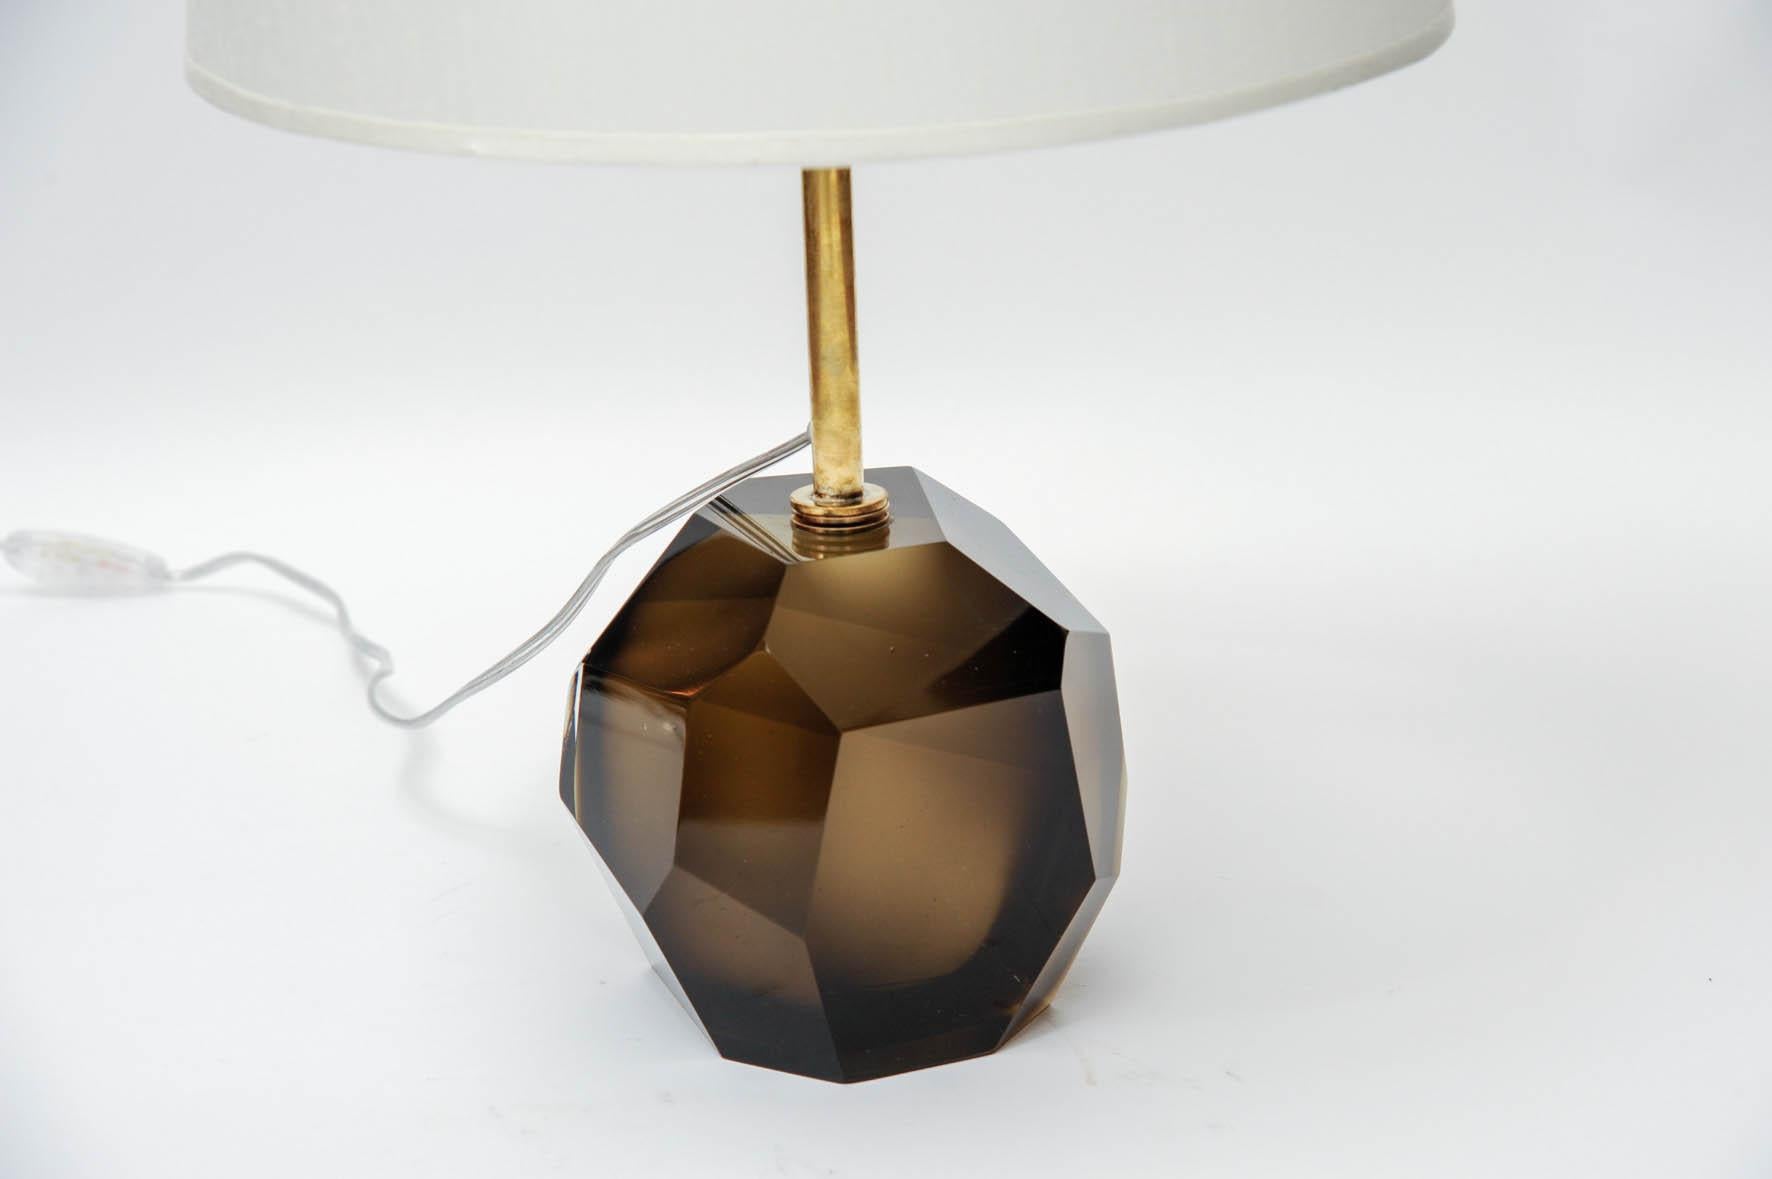 Pair of table lamps made of faceted glass blocs in this chic smoked color with a long brass neck.